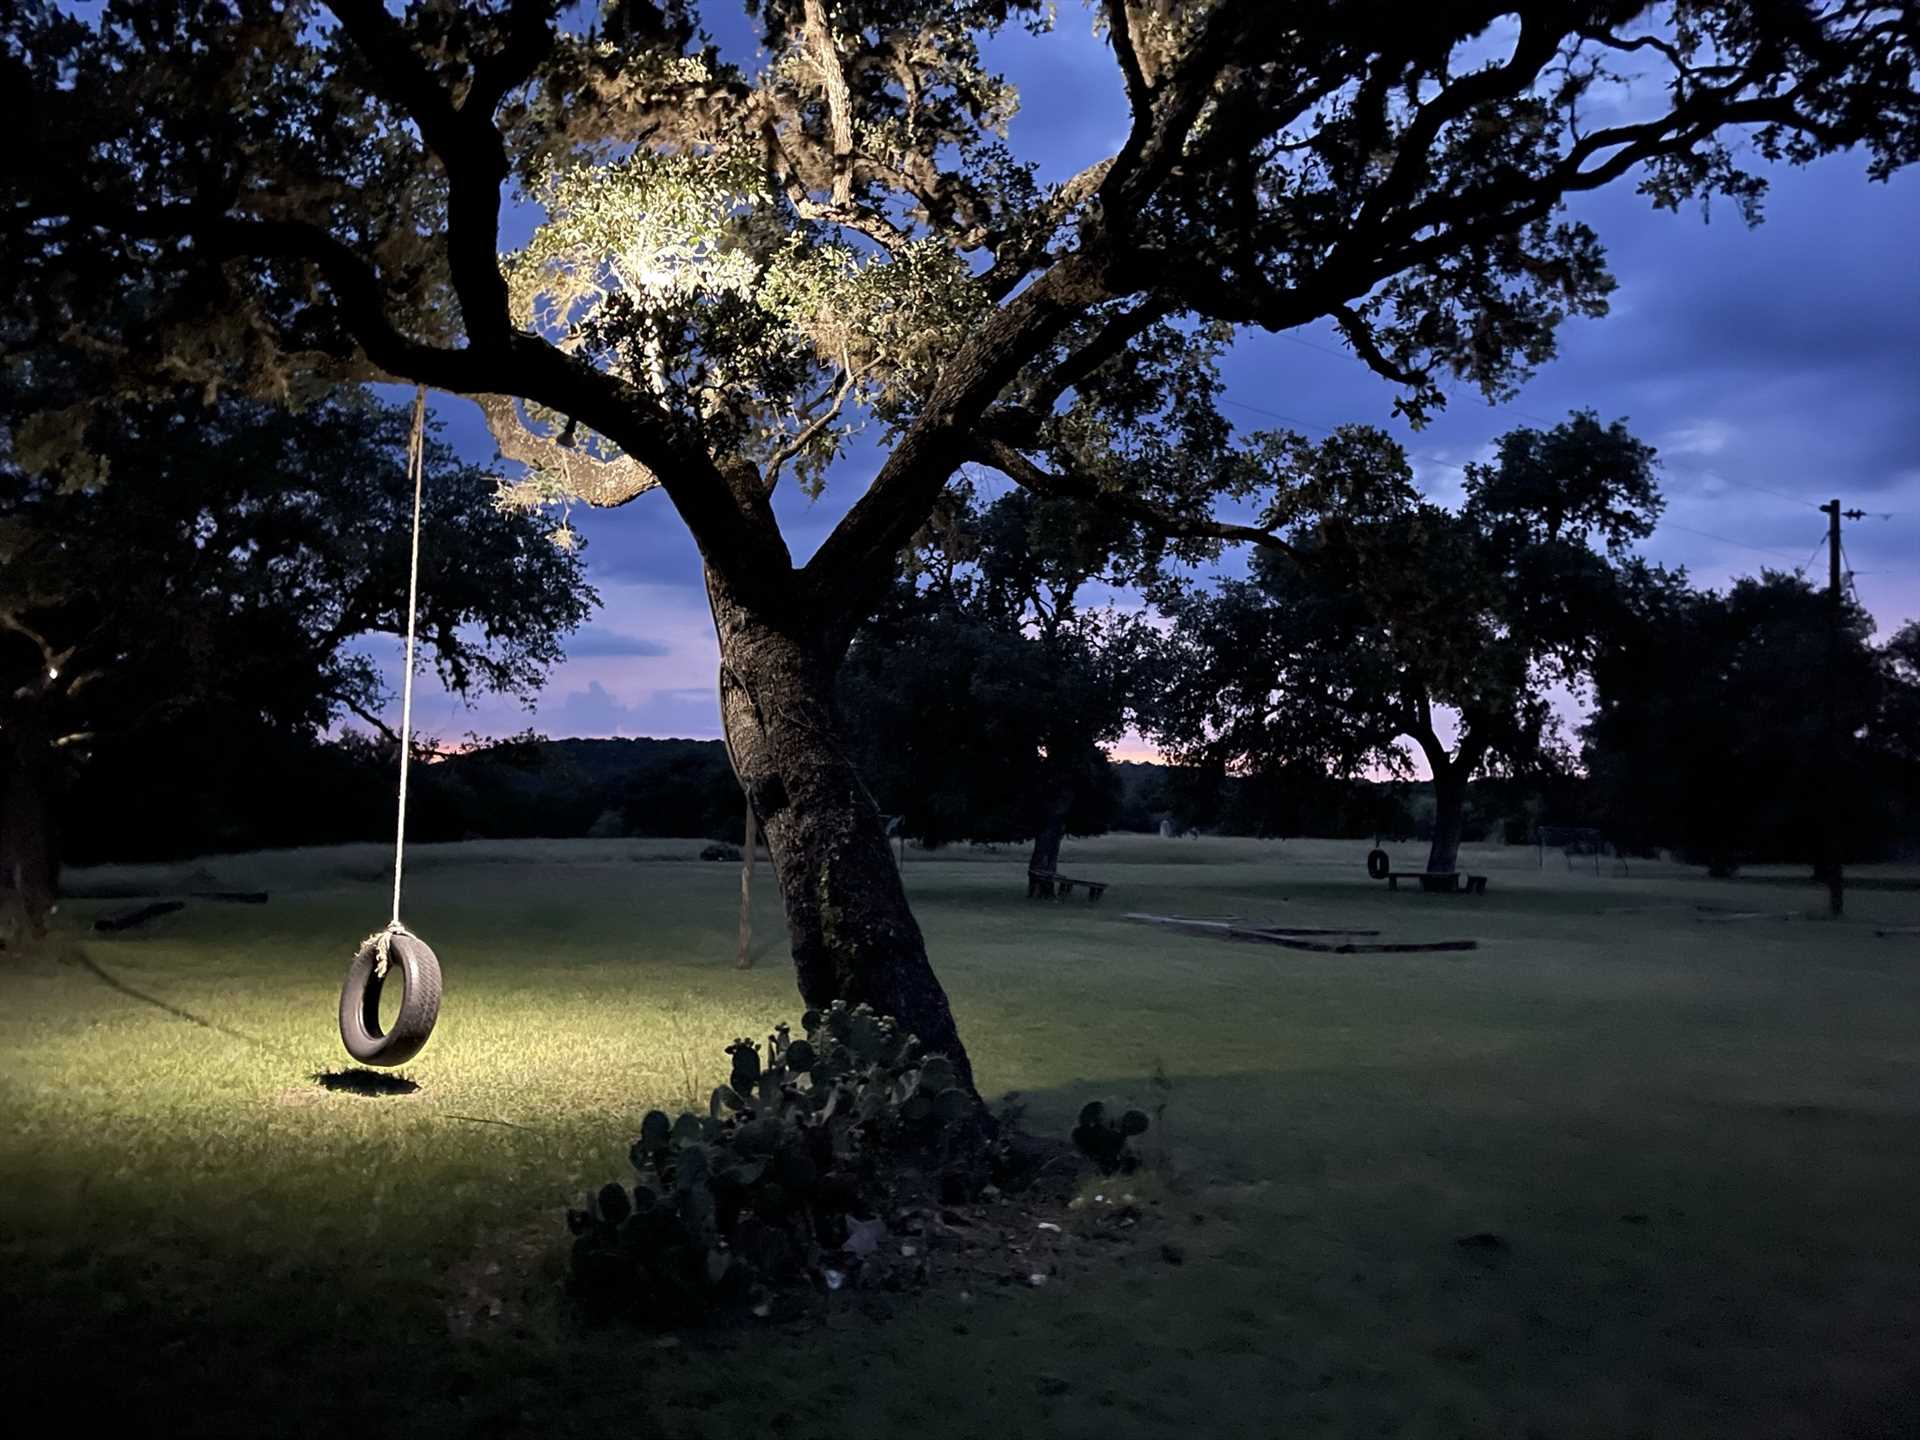                                                 The old-fashioned tire swing out back provides simple country fun-and it's lit for day and night use!